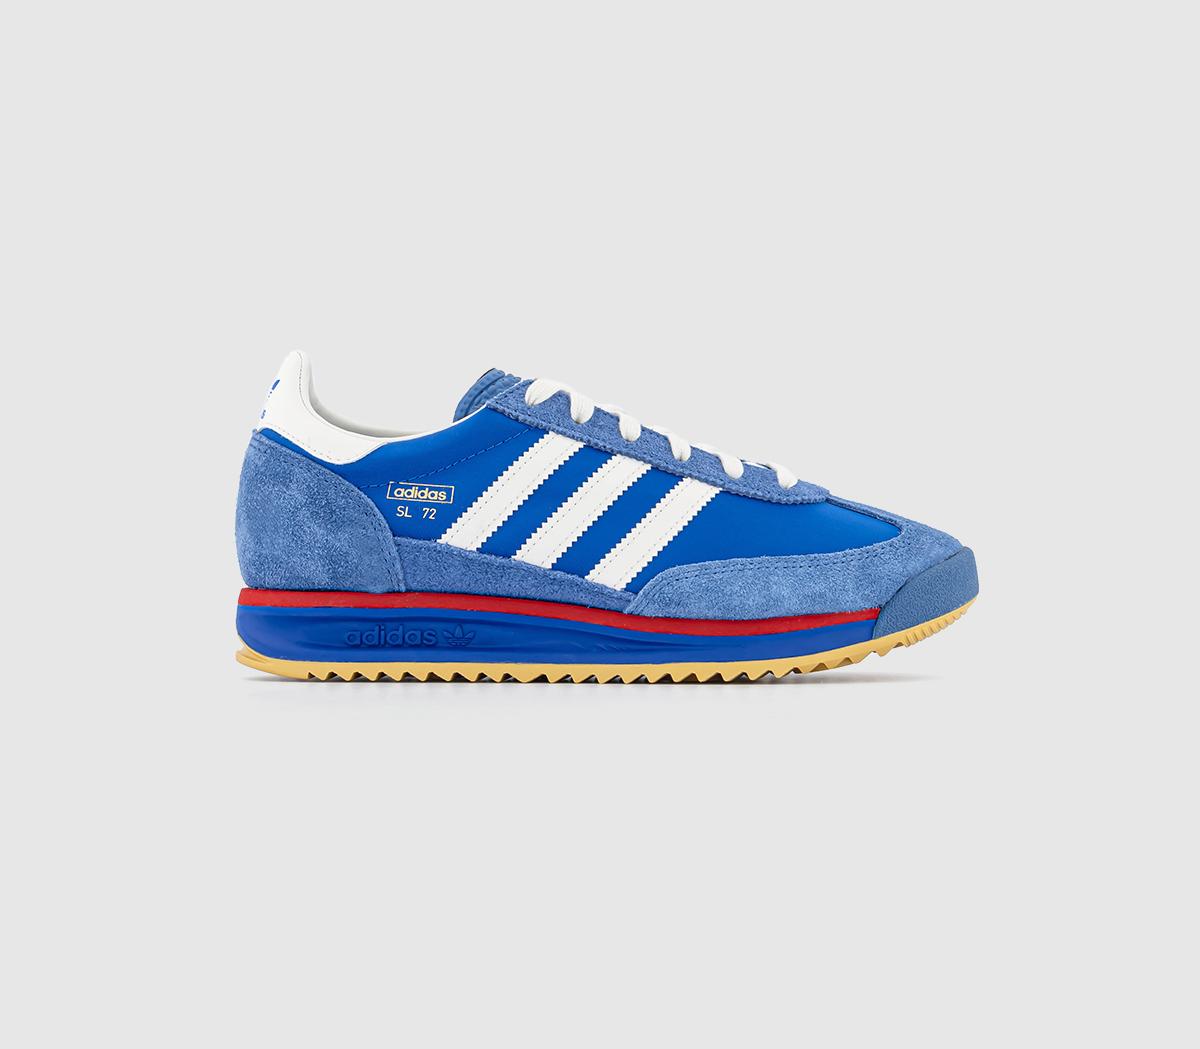 adidas SL 72 RS Trainers Blue White - Women's Trainers